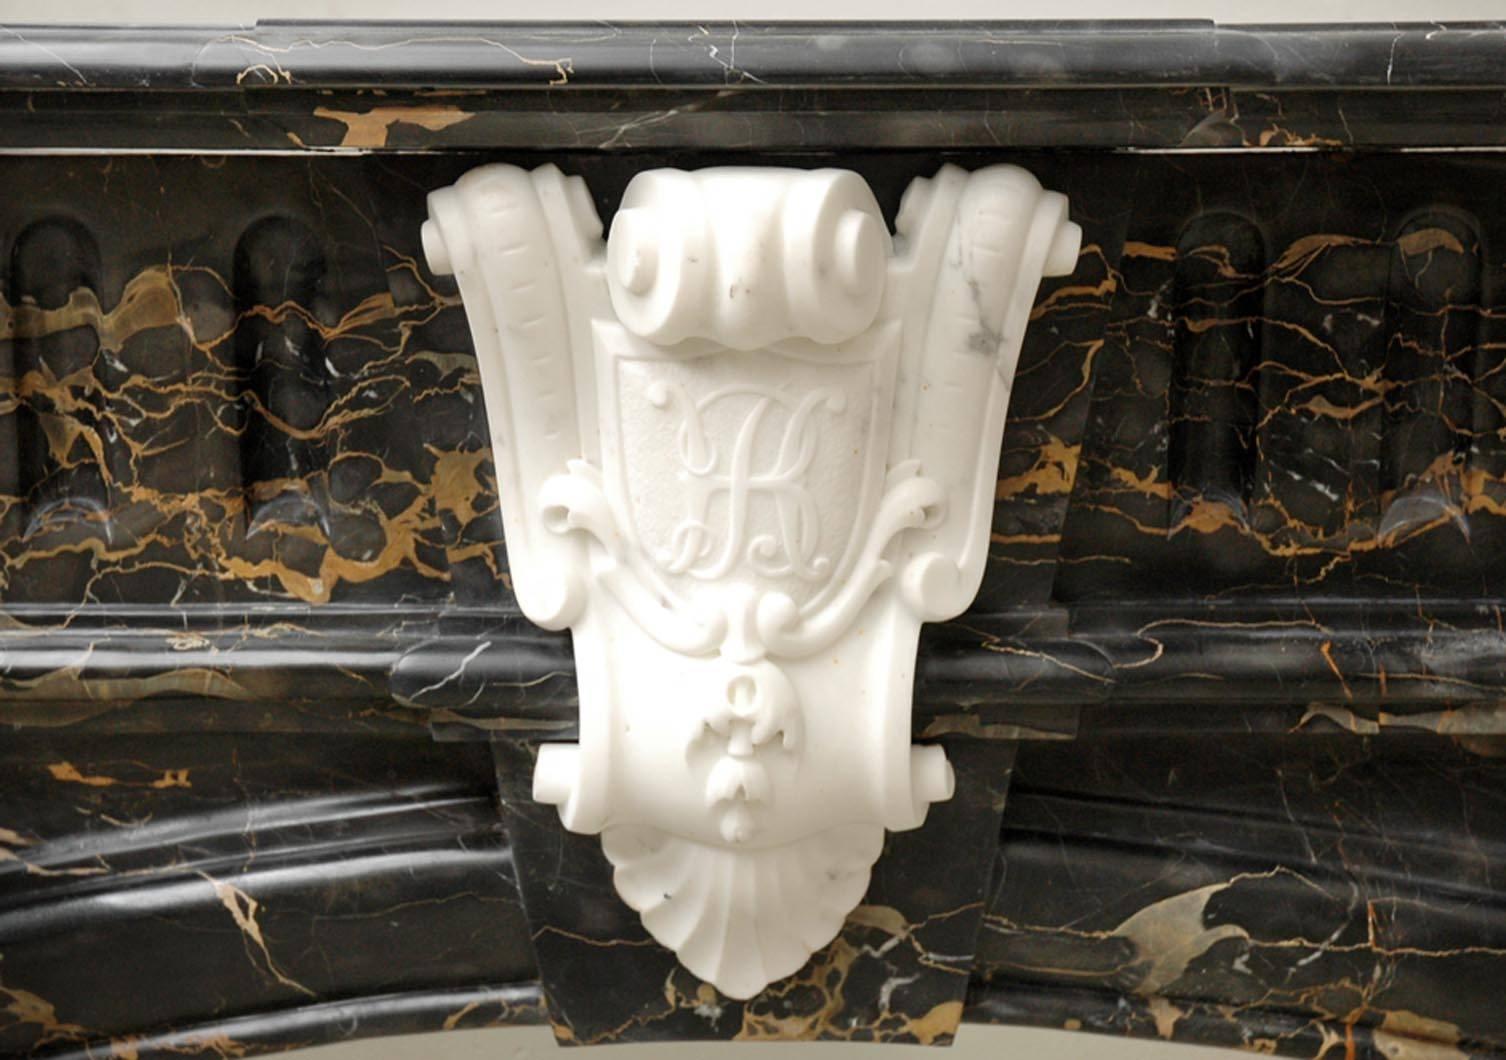 This exceptional antique Napoleon III style fireplace was made out of Portor marble and statuary marble in the late 19th century.
This particular design detached columns with statuary marble Corinthians capitals. The center of the entablature bears